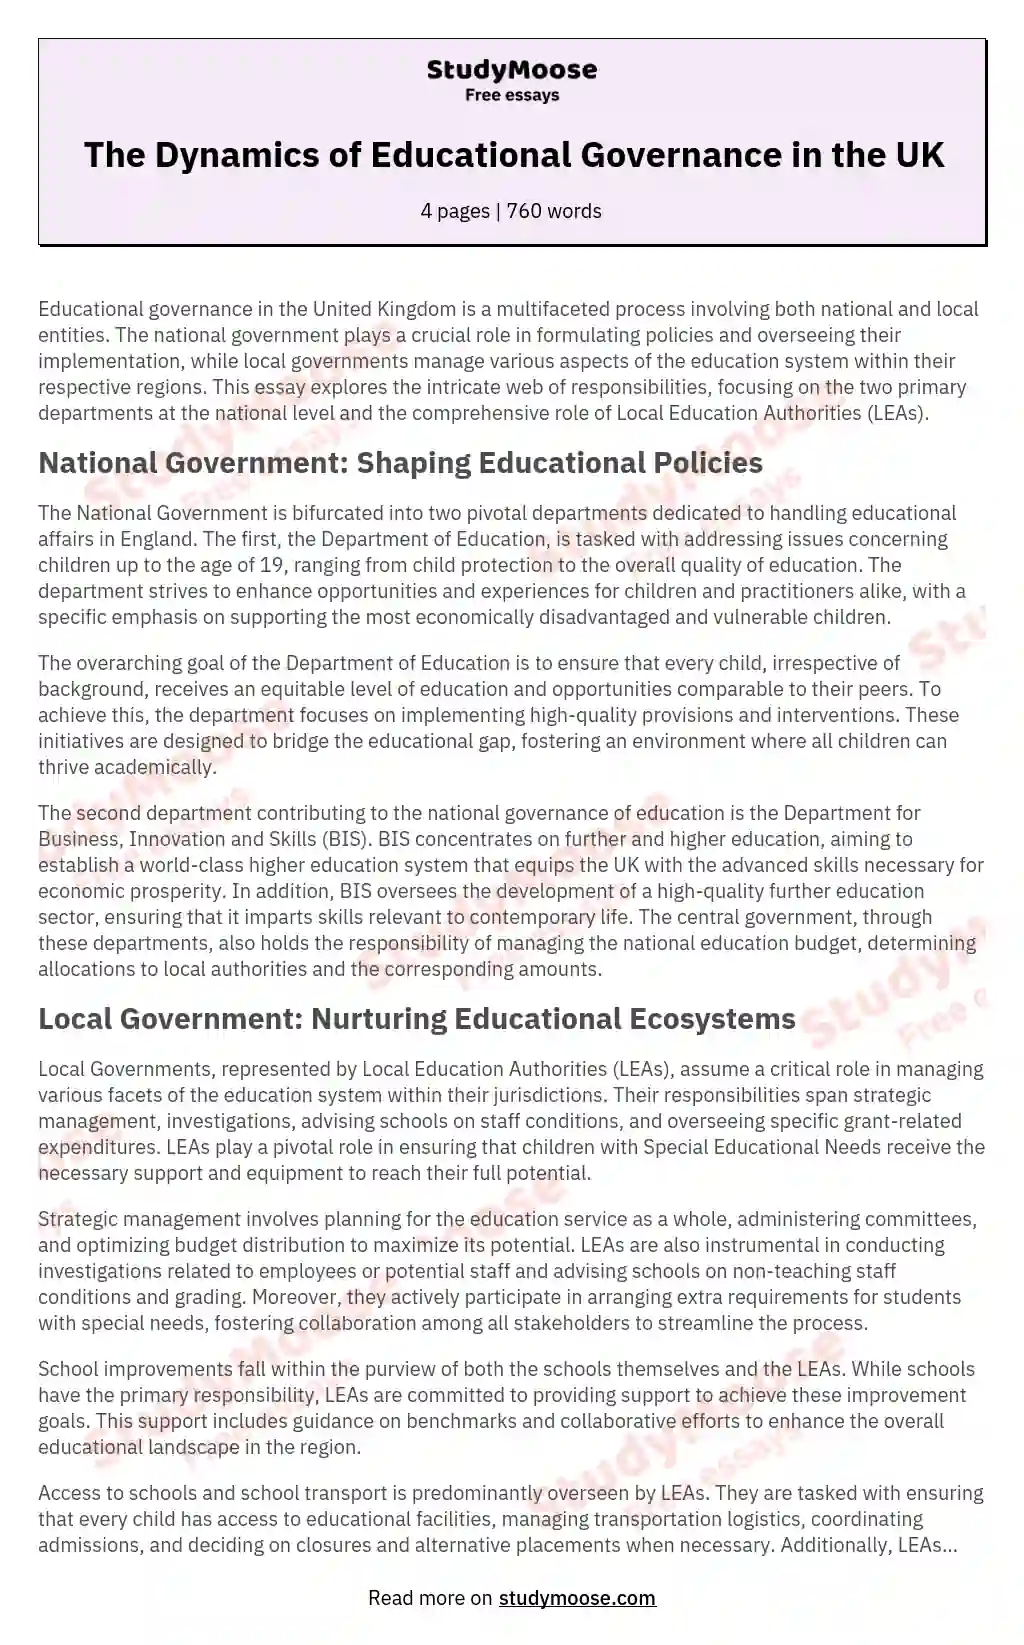 The Dynamics of Educational Governance in the UK essay